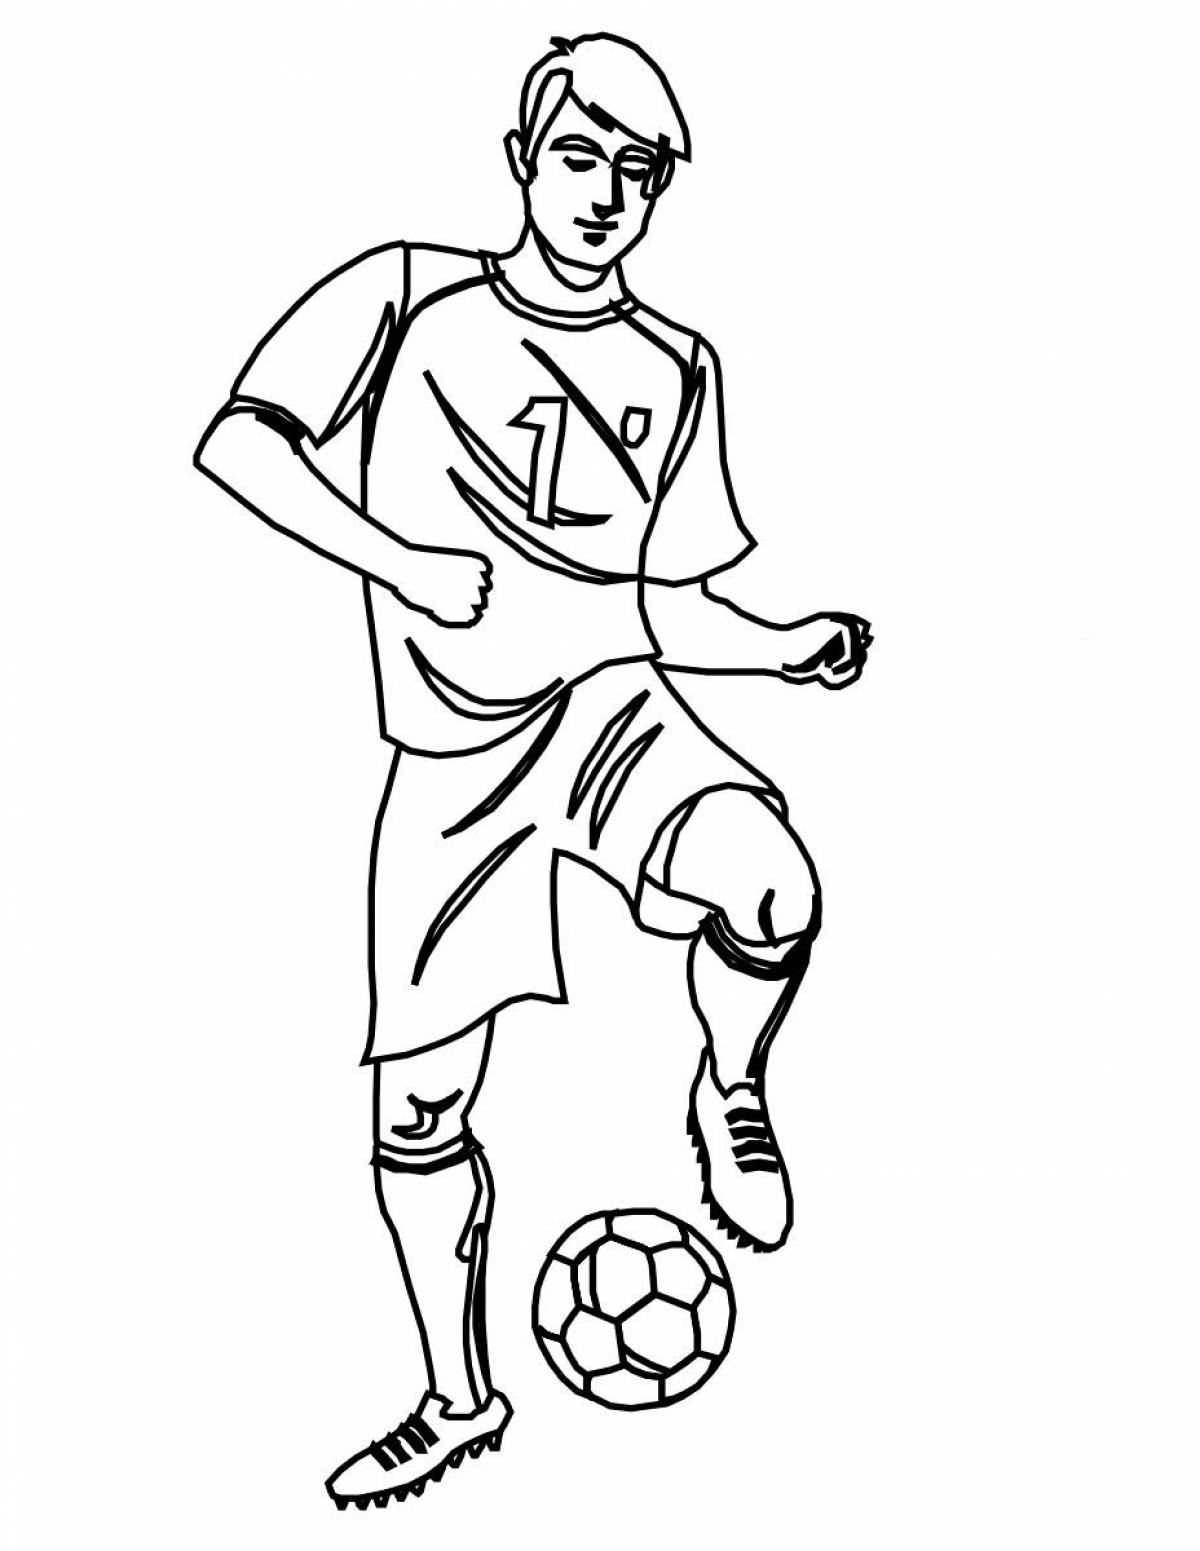 Coloring book sports football player